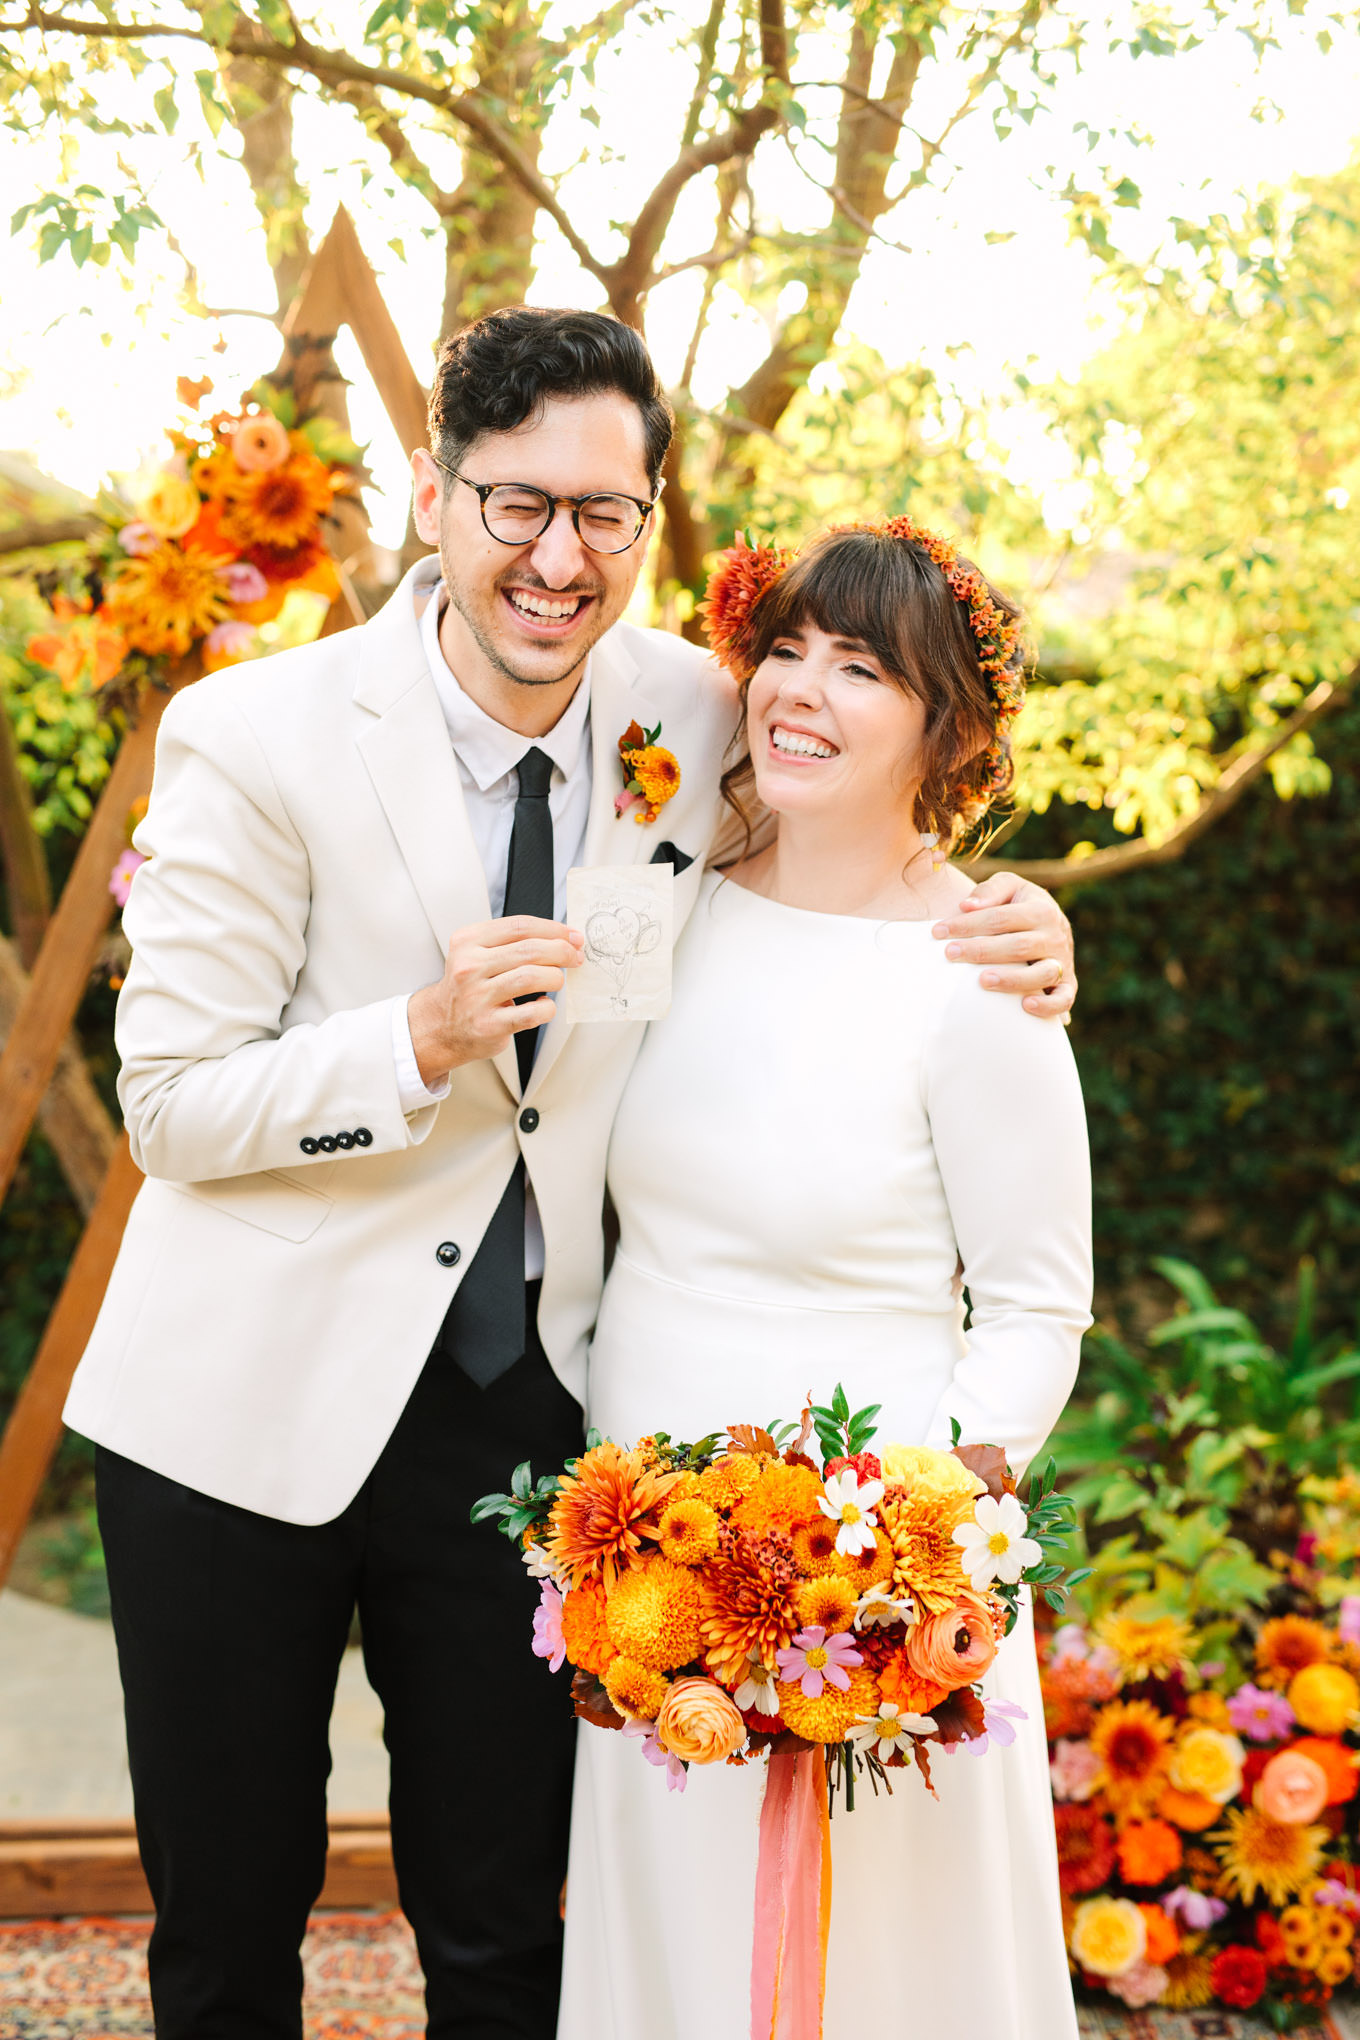 Candid portrait of the bride and groom | Vibrant backyard micro wedding featured on Green Wedding Shoes | Colorful LA wedding photography | #losangeleswedding #backyardwedding #microwedding #laweddingphotographer Source: Mary Costa Photography | Los Angeles